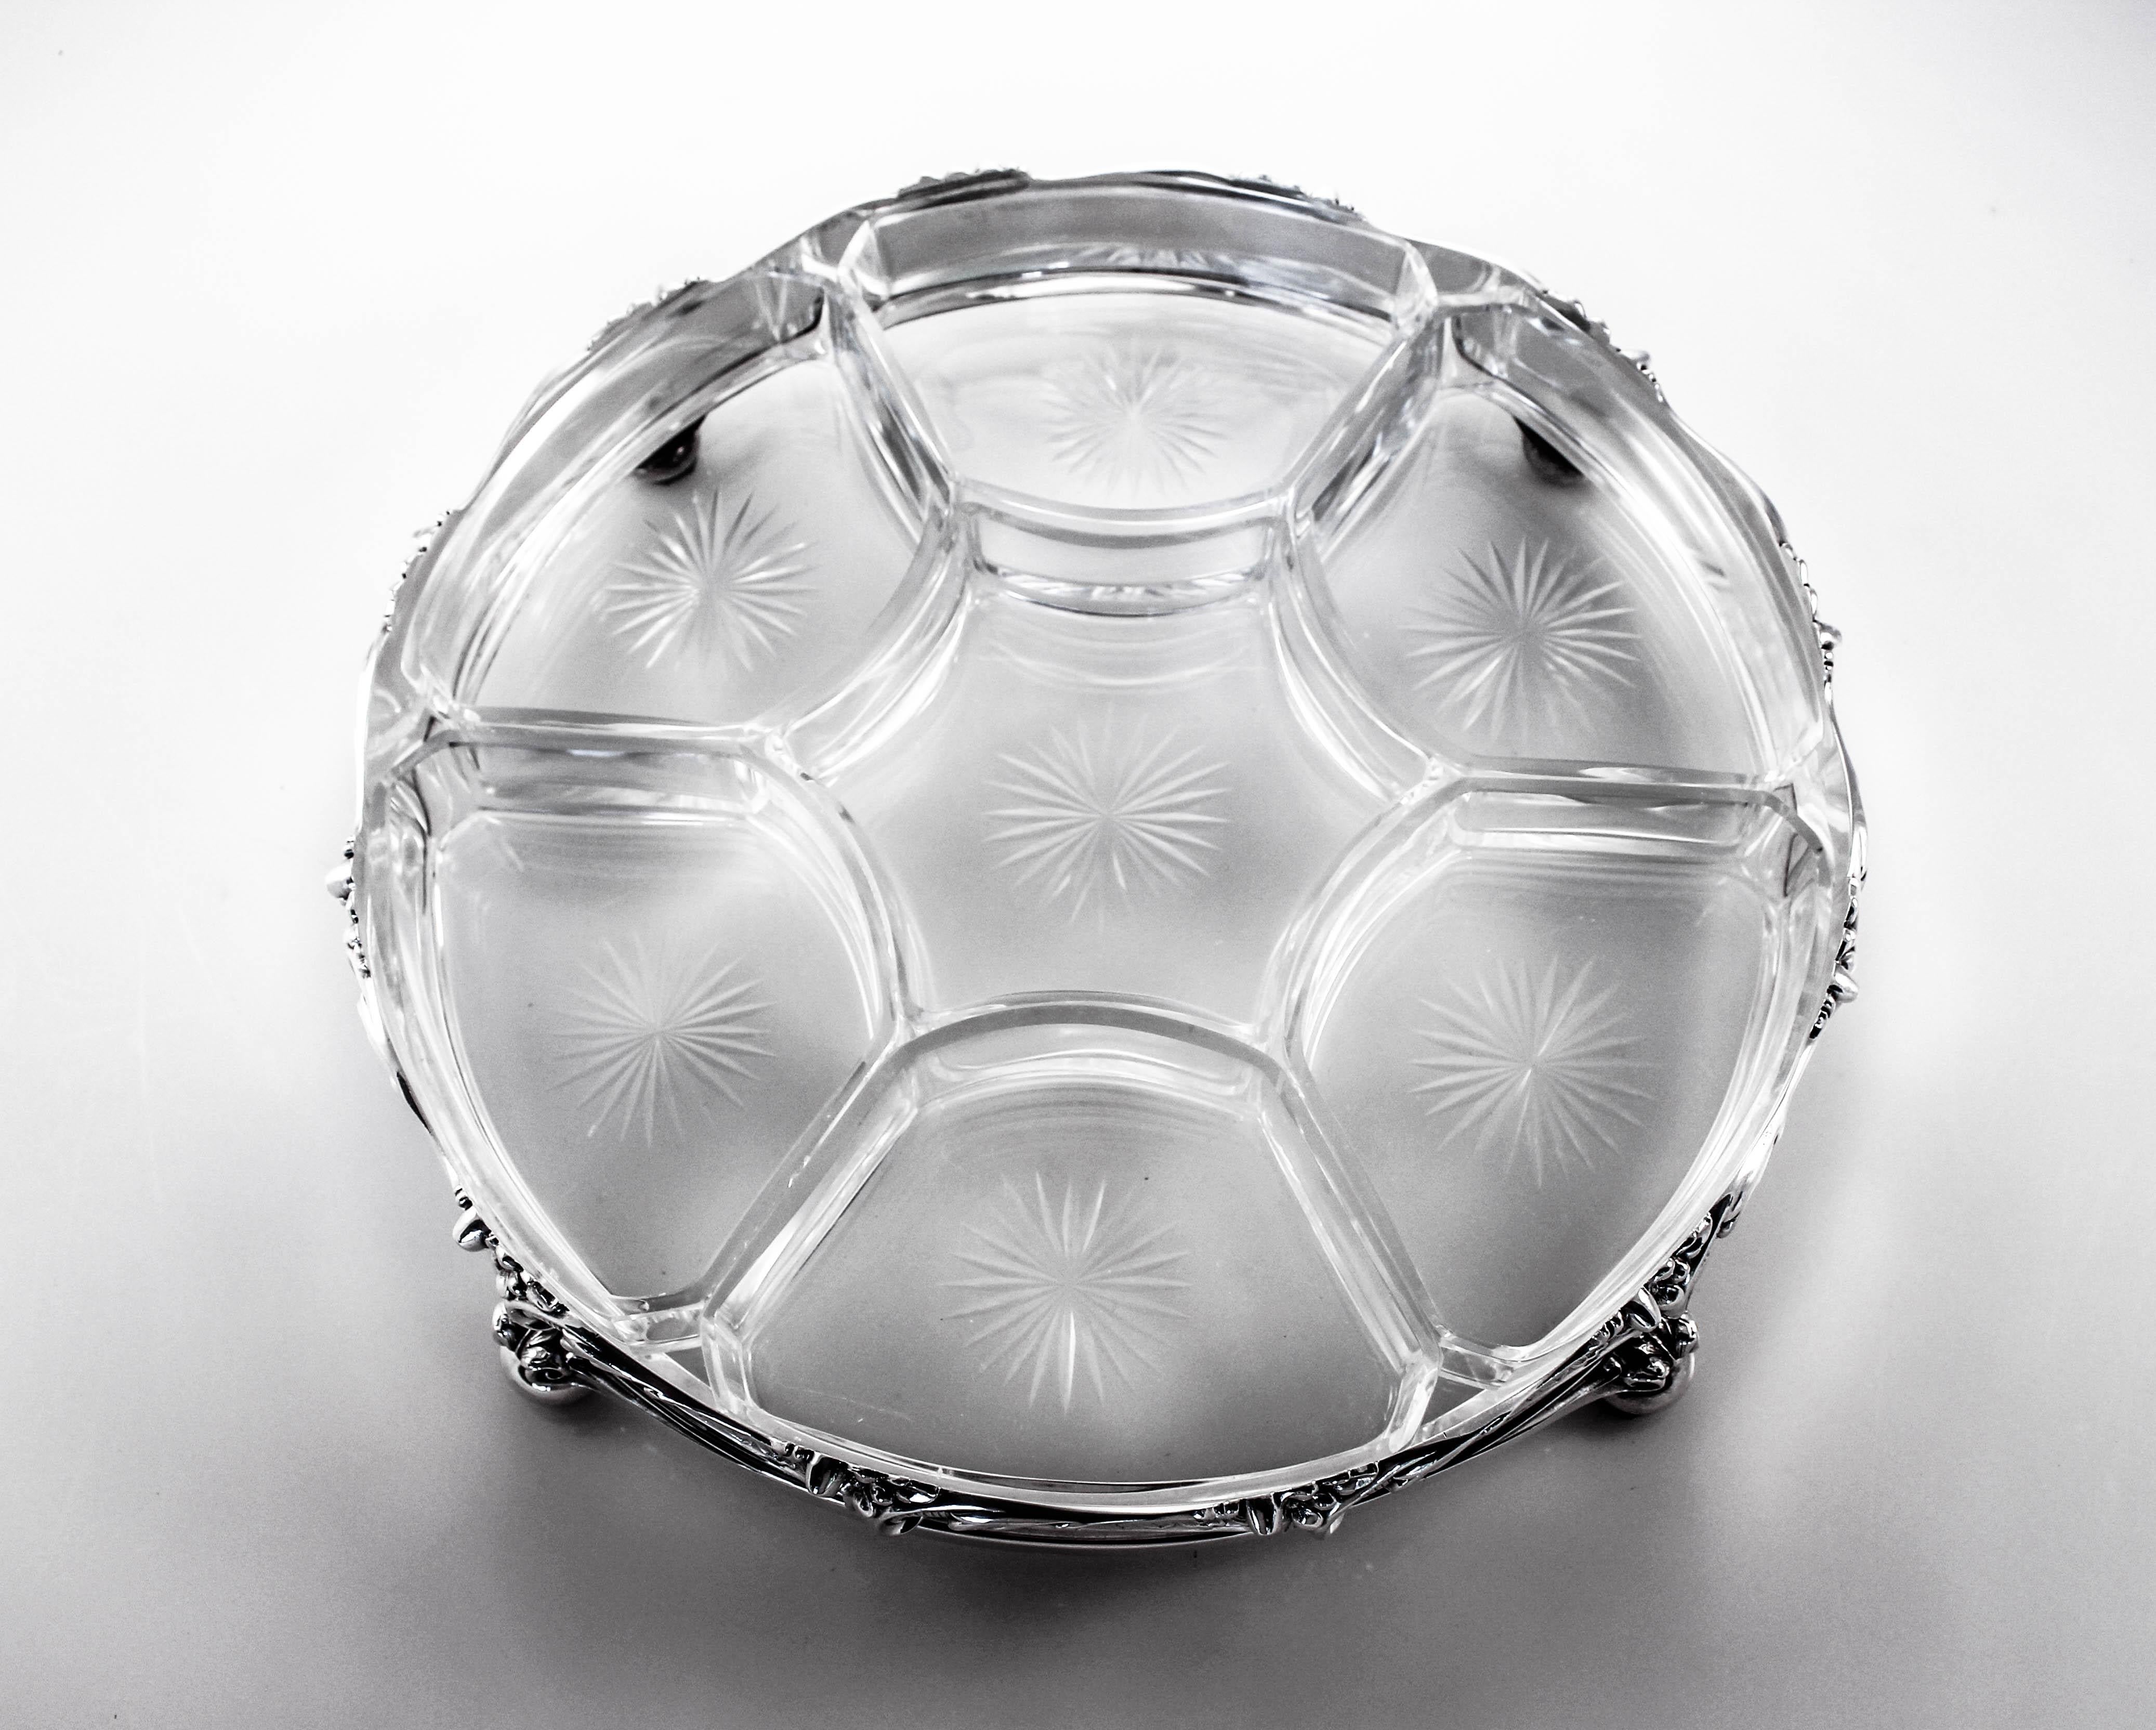 We are most delighted to offer this sterling silver and crystal sectional. Truly a one-of-kind piece! We have never seen nor had anything on this scale like it before. A series of seven crystal bowls interlock like a jigsaw puzzle to create this